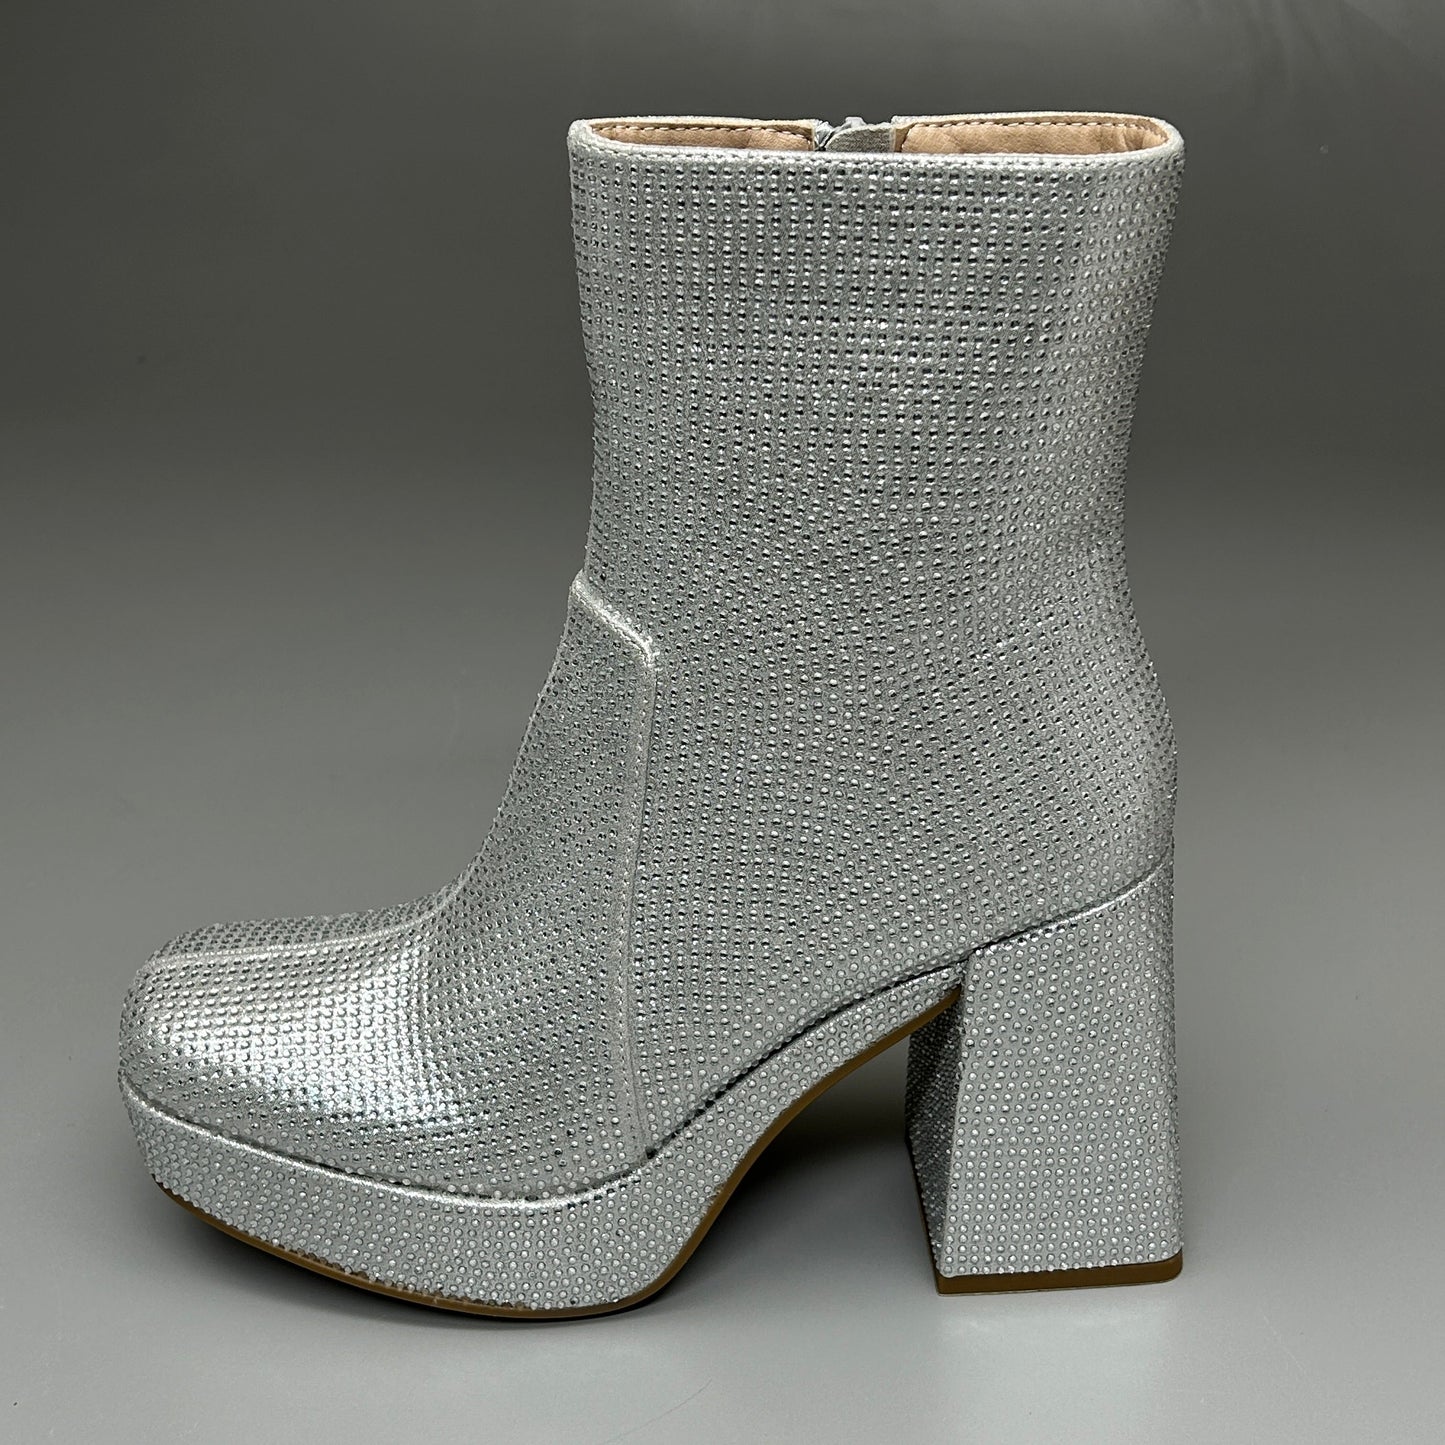 MIA Iva Silver Stone Heeled Boots Women's Sz 7.5 Silver GS1253108 (New)